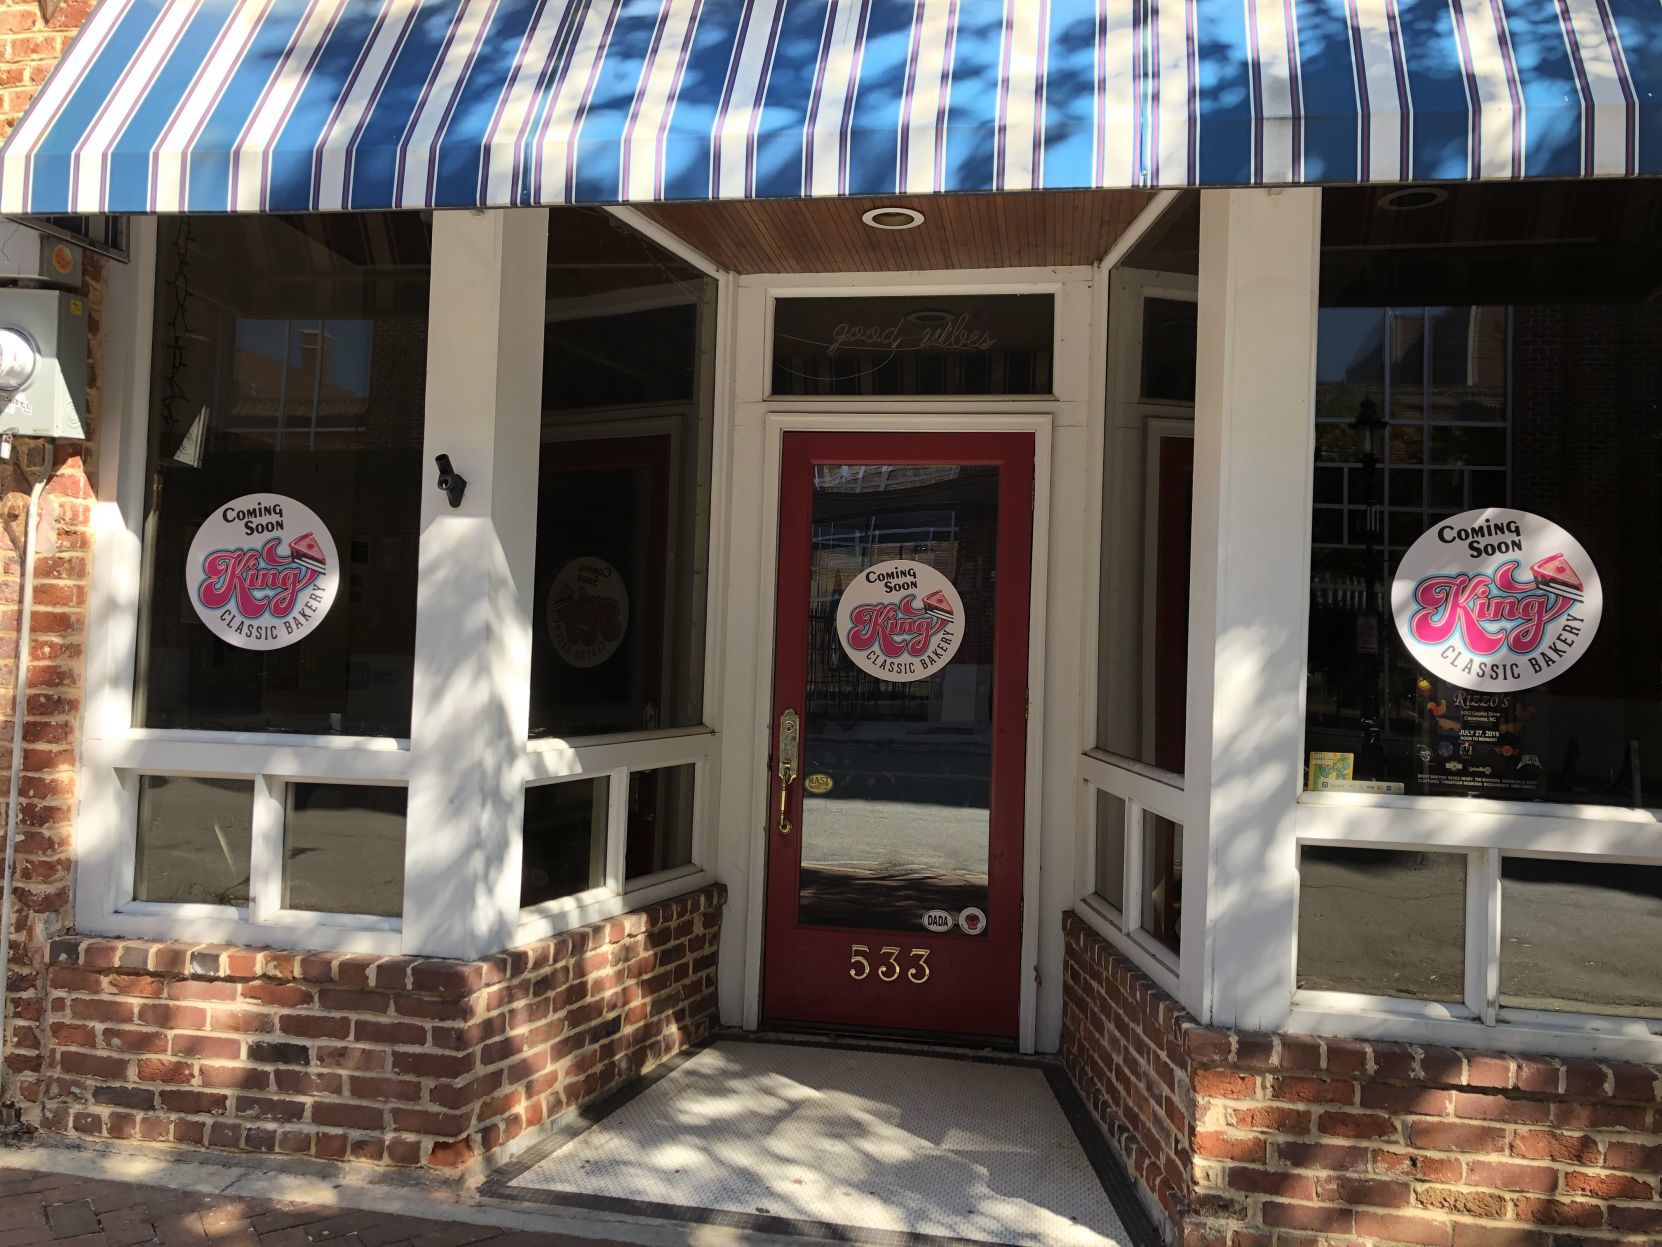 NOTHING BUNDT CAKES NOW OPEN NEAR MALL - The Burn